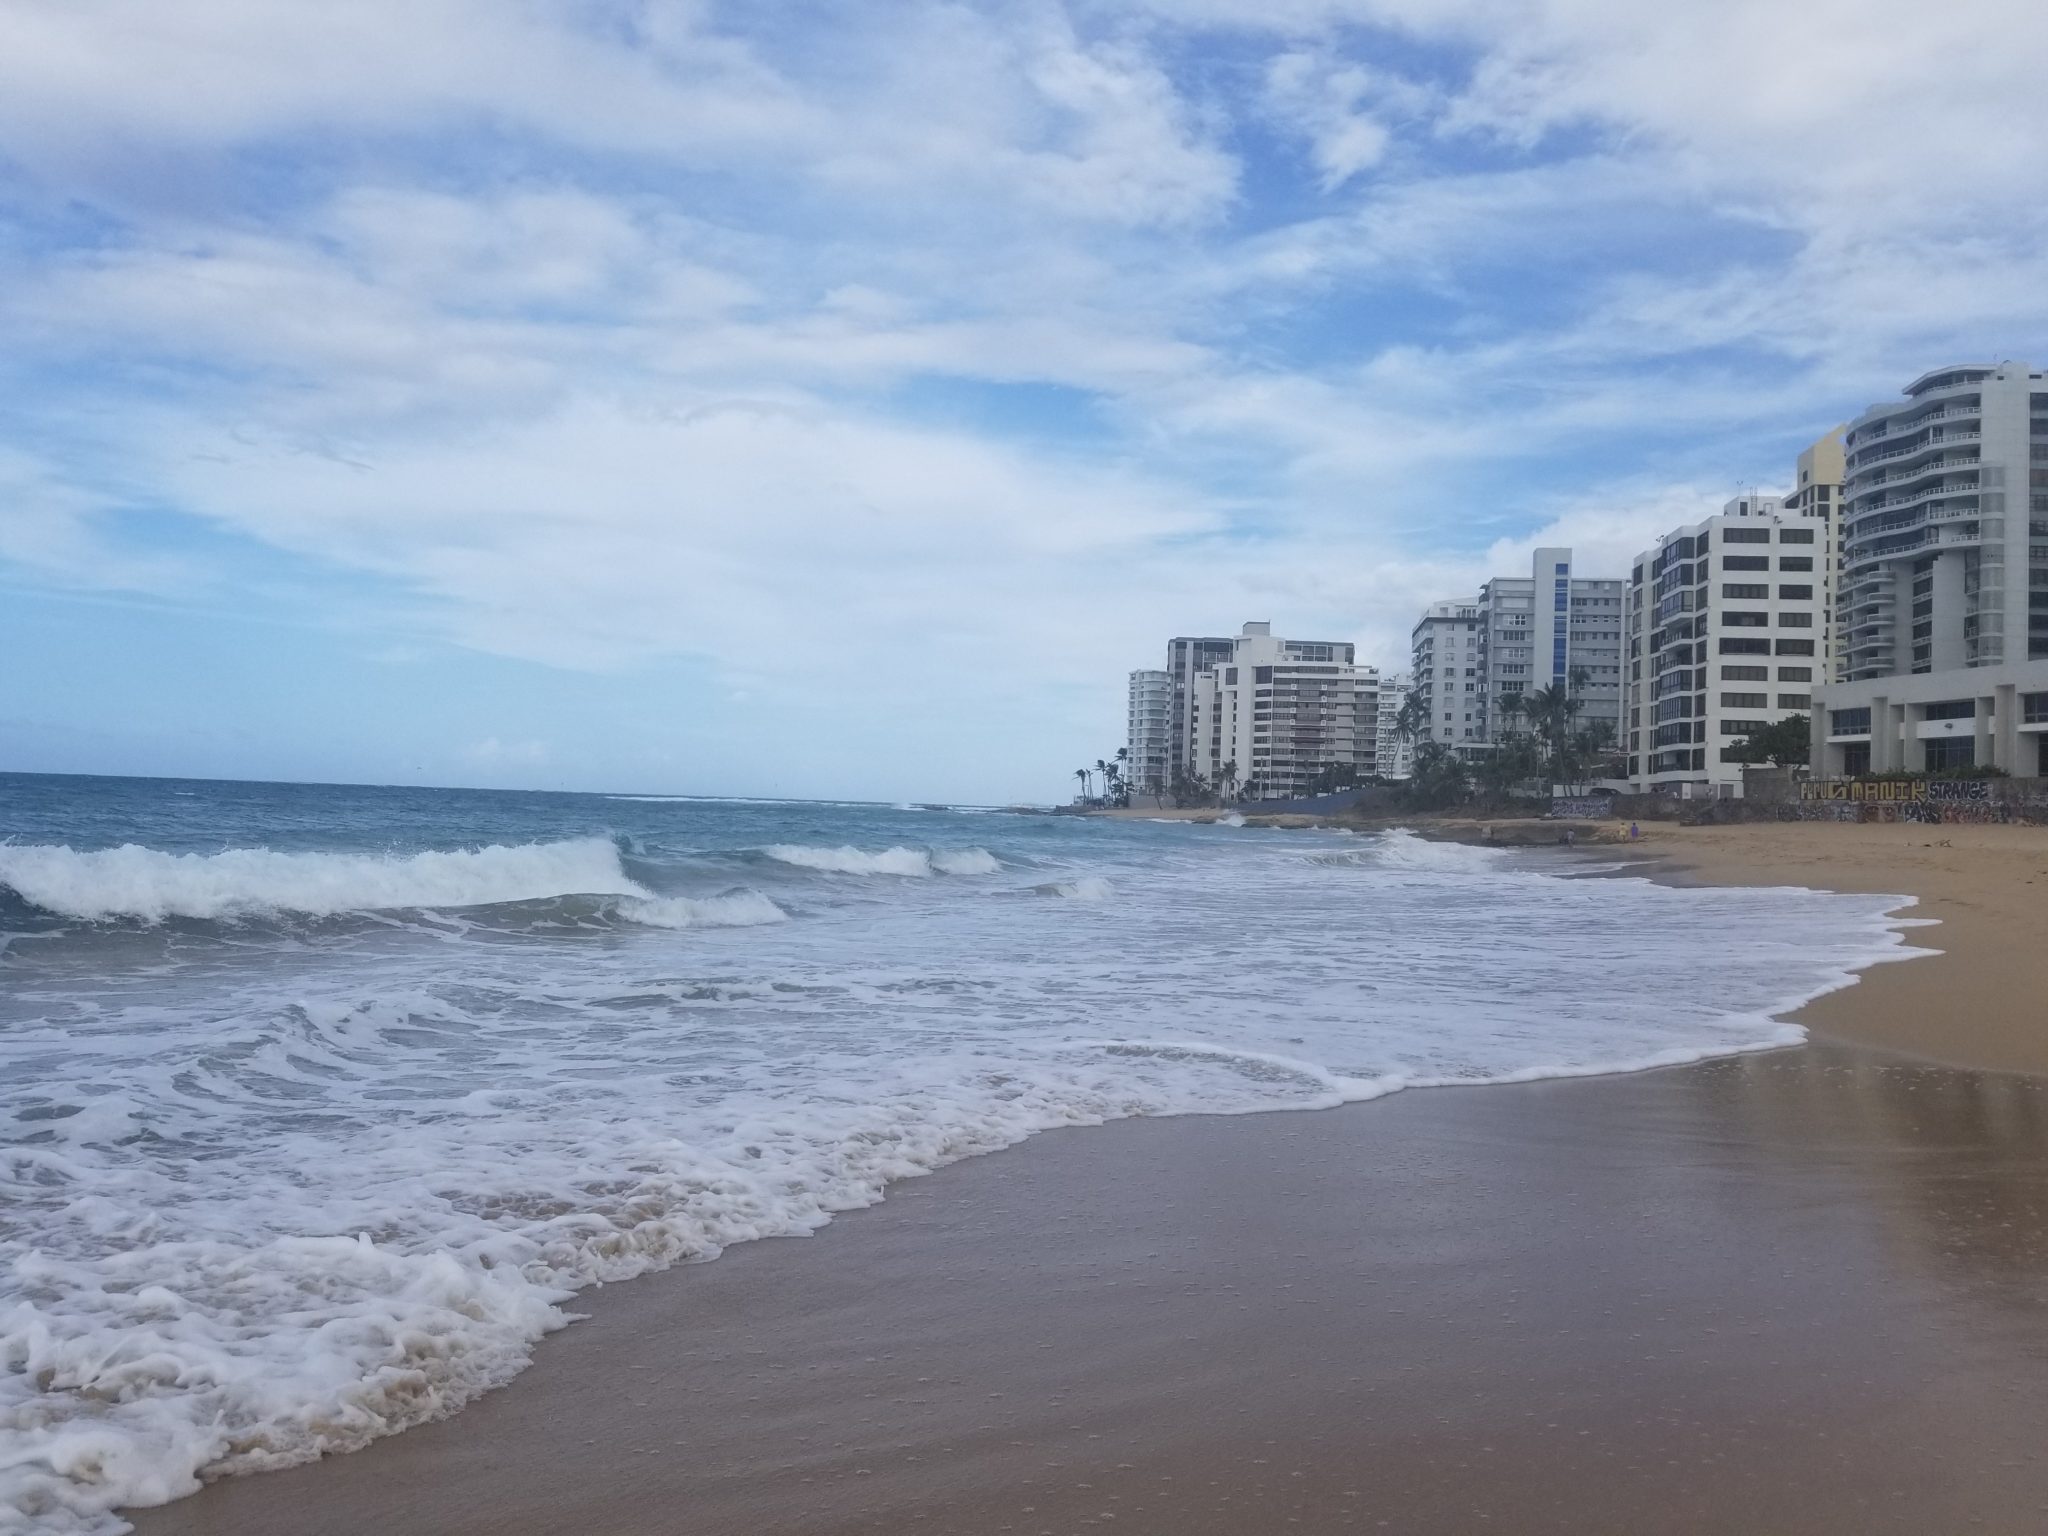 a beach with buildings and waves